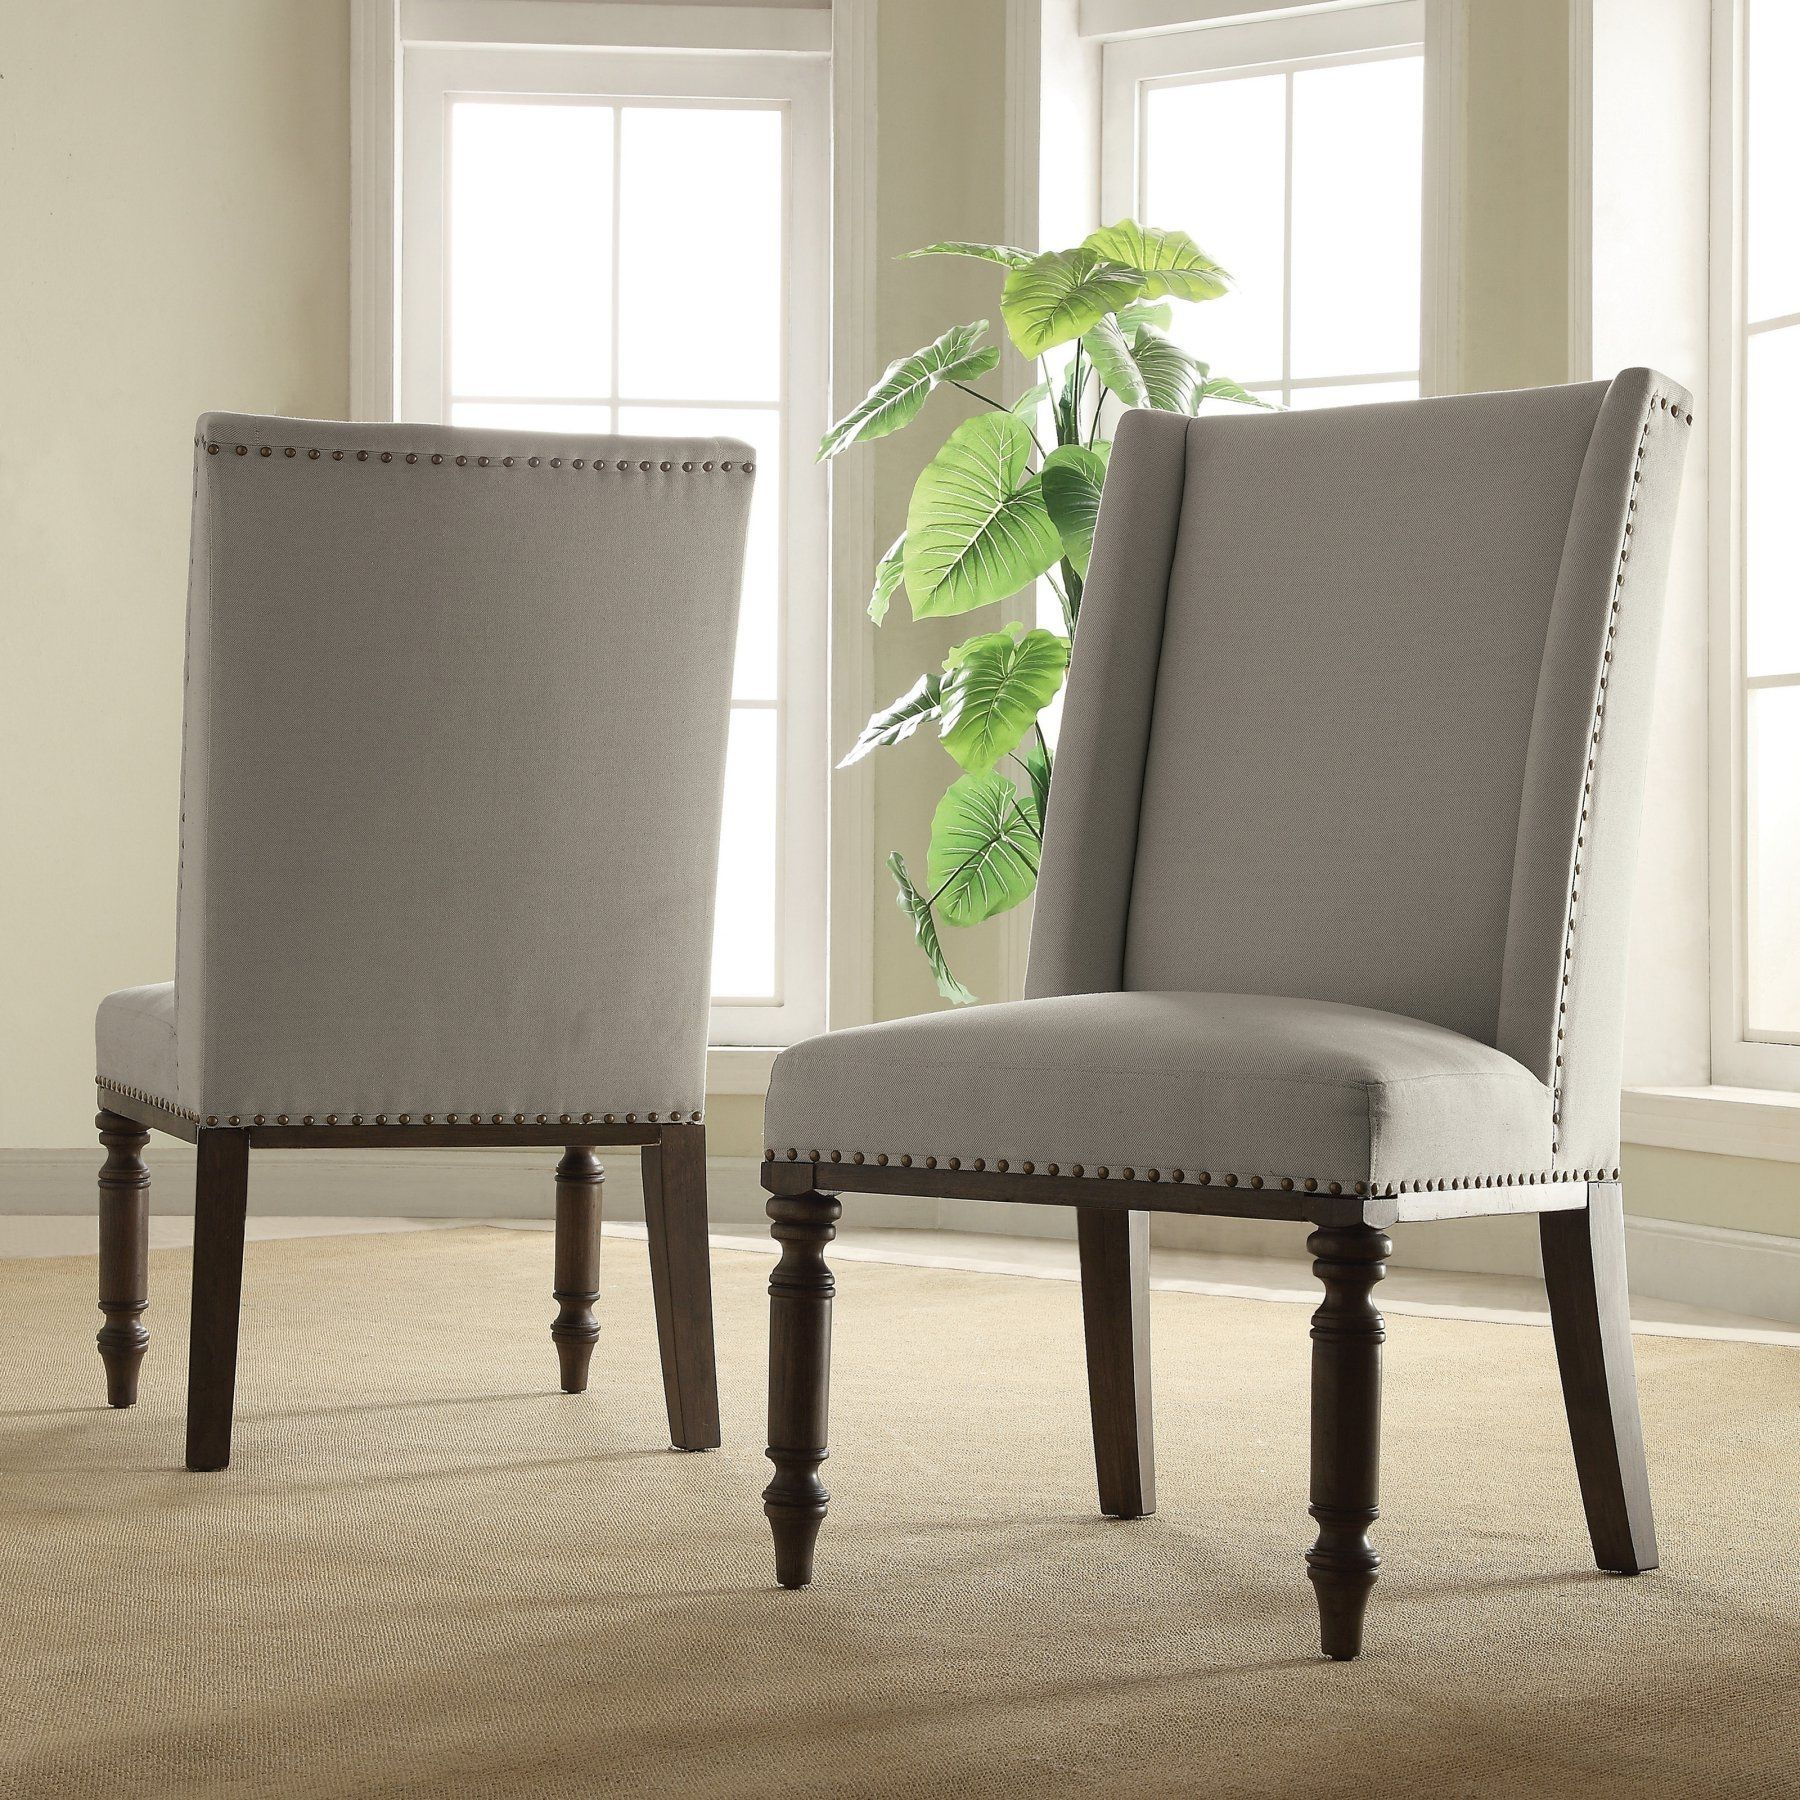 Fashionable Riverside Belmeade Upholstered Hostess Chairs – Set Of 2 – Rvs2940 Pertaining To Belmeade Side Chairs (View 5 of 20)